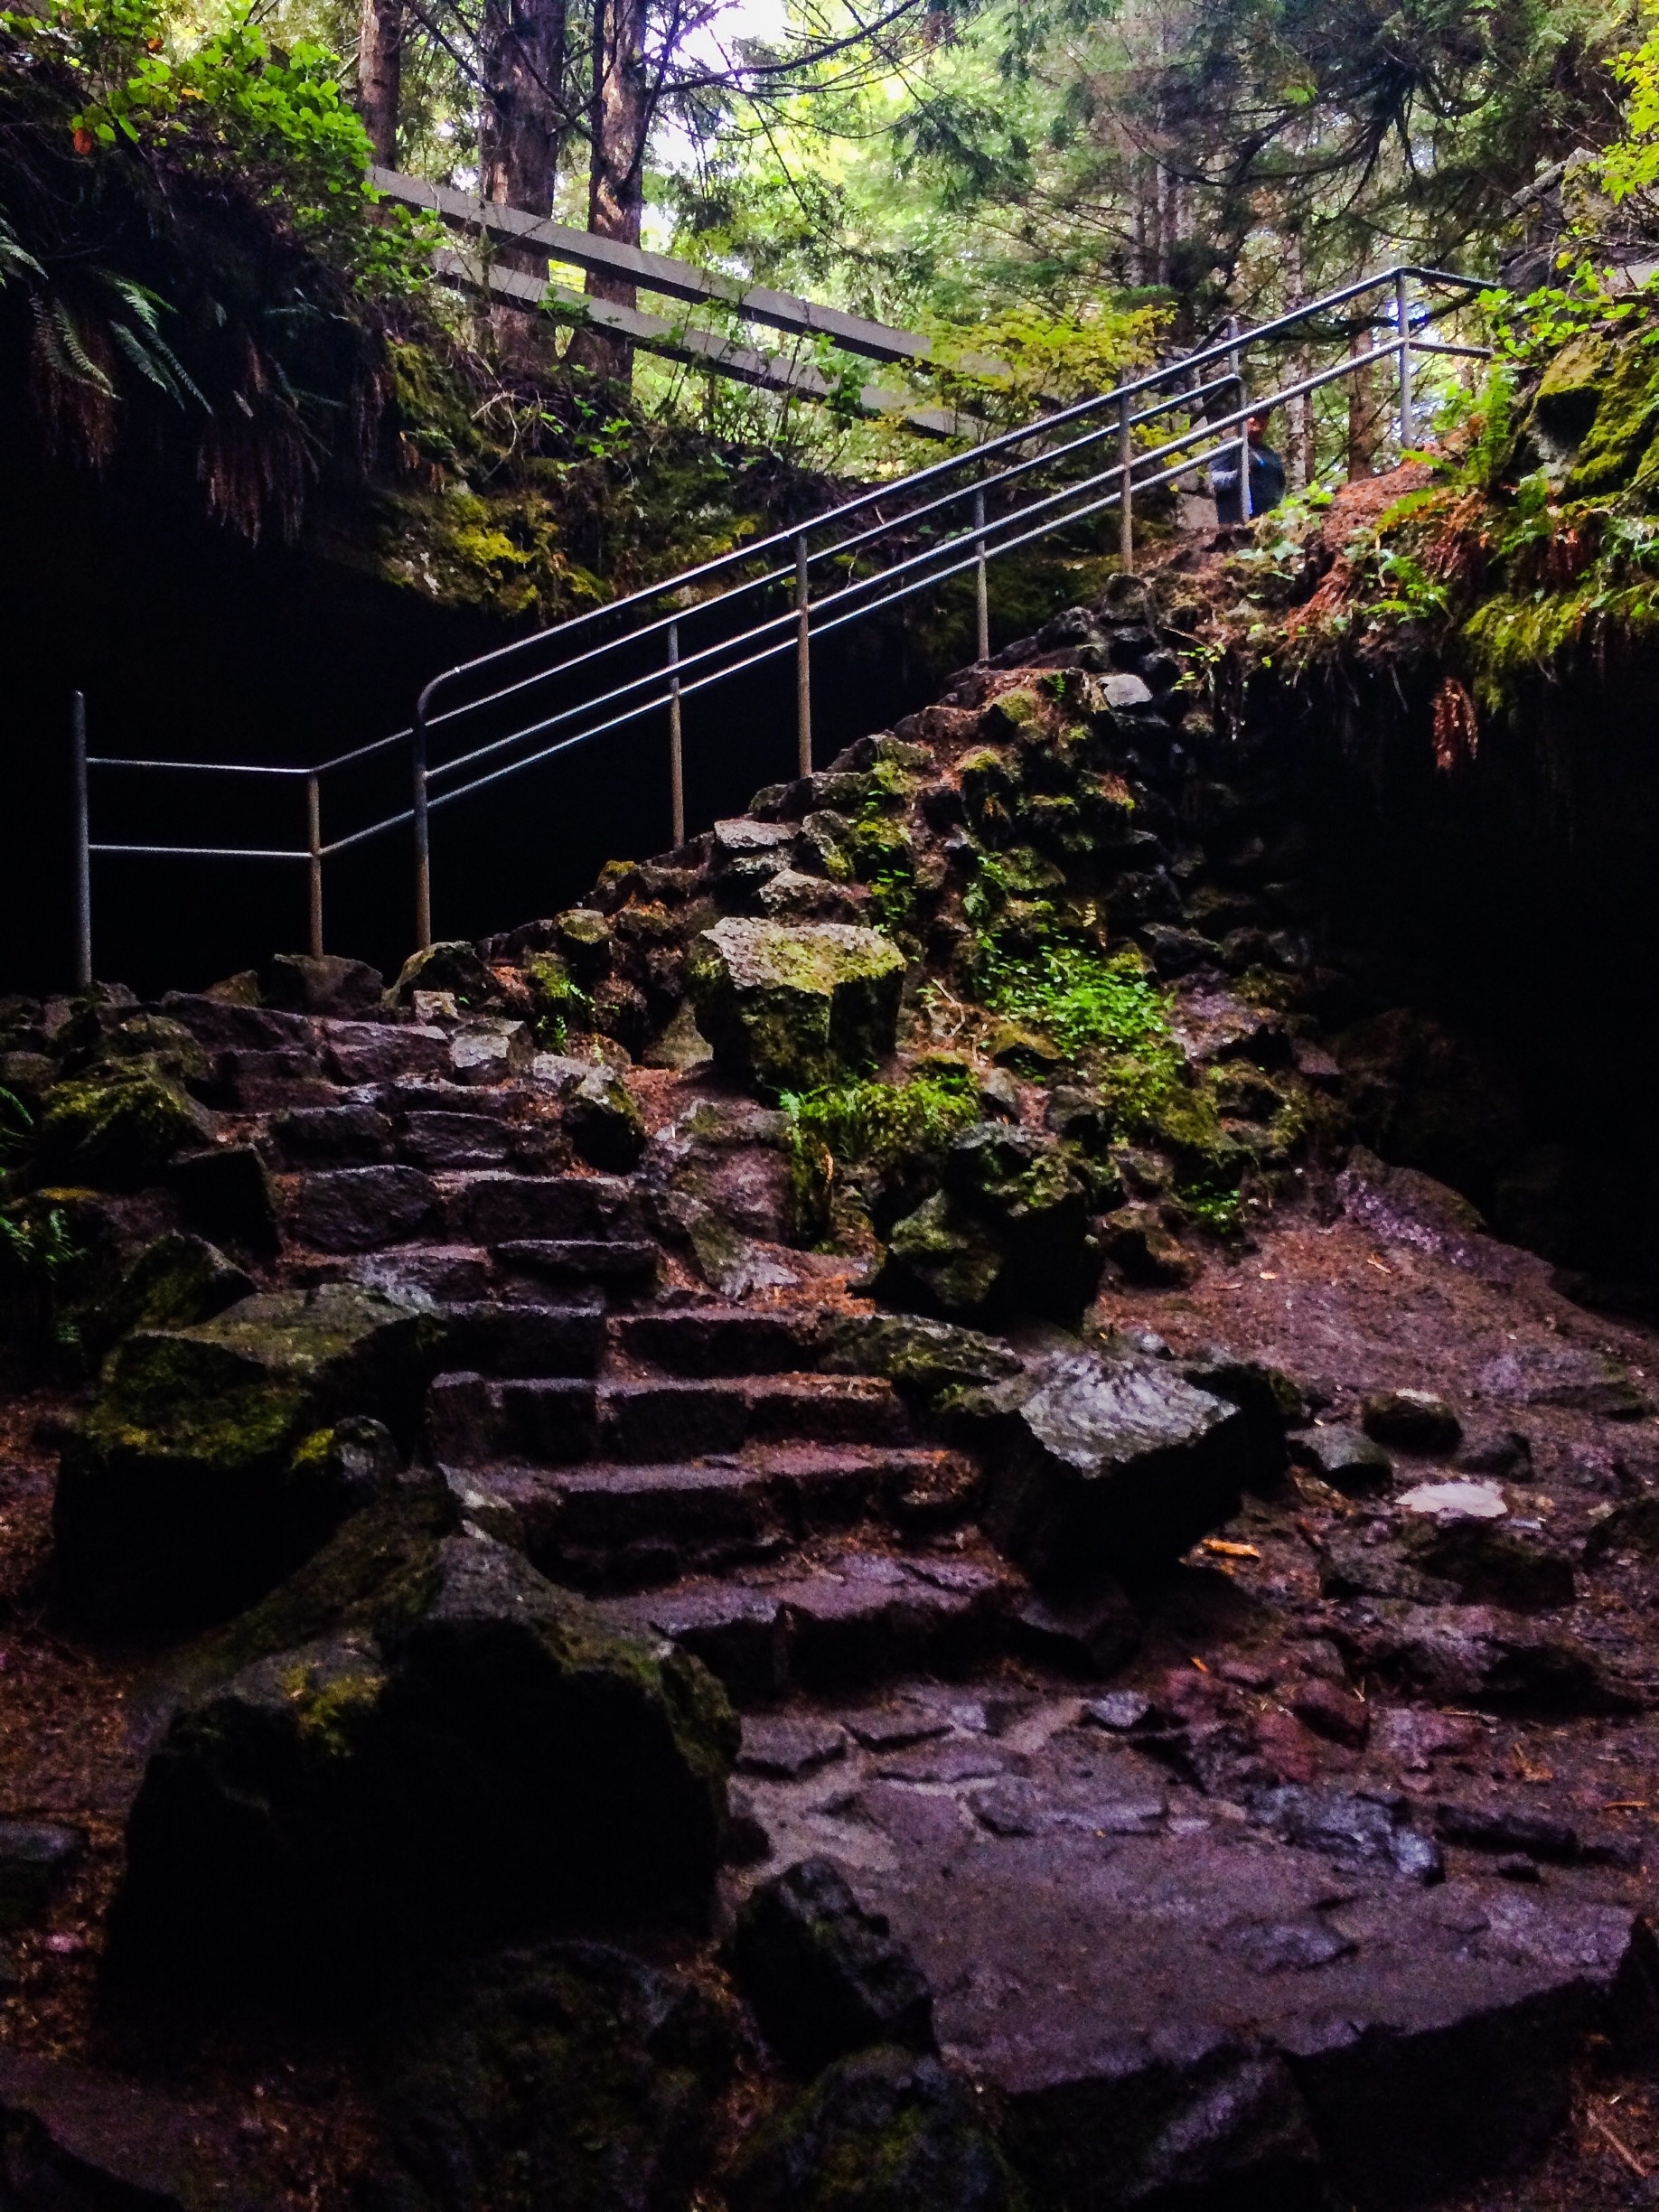 Ape cave is the longest lava tube in North America.  It's full of boulders to scramble over and at 3 miles long with an average temp of 42 degrees this is one cool lava tube to hike through. #MountStHelens #ApeCave #LavaTubes #GetOutdoors 